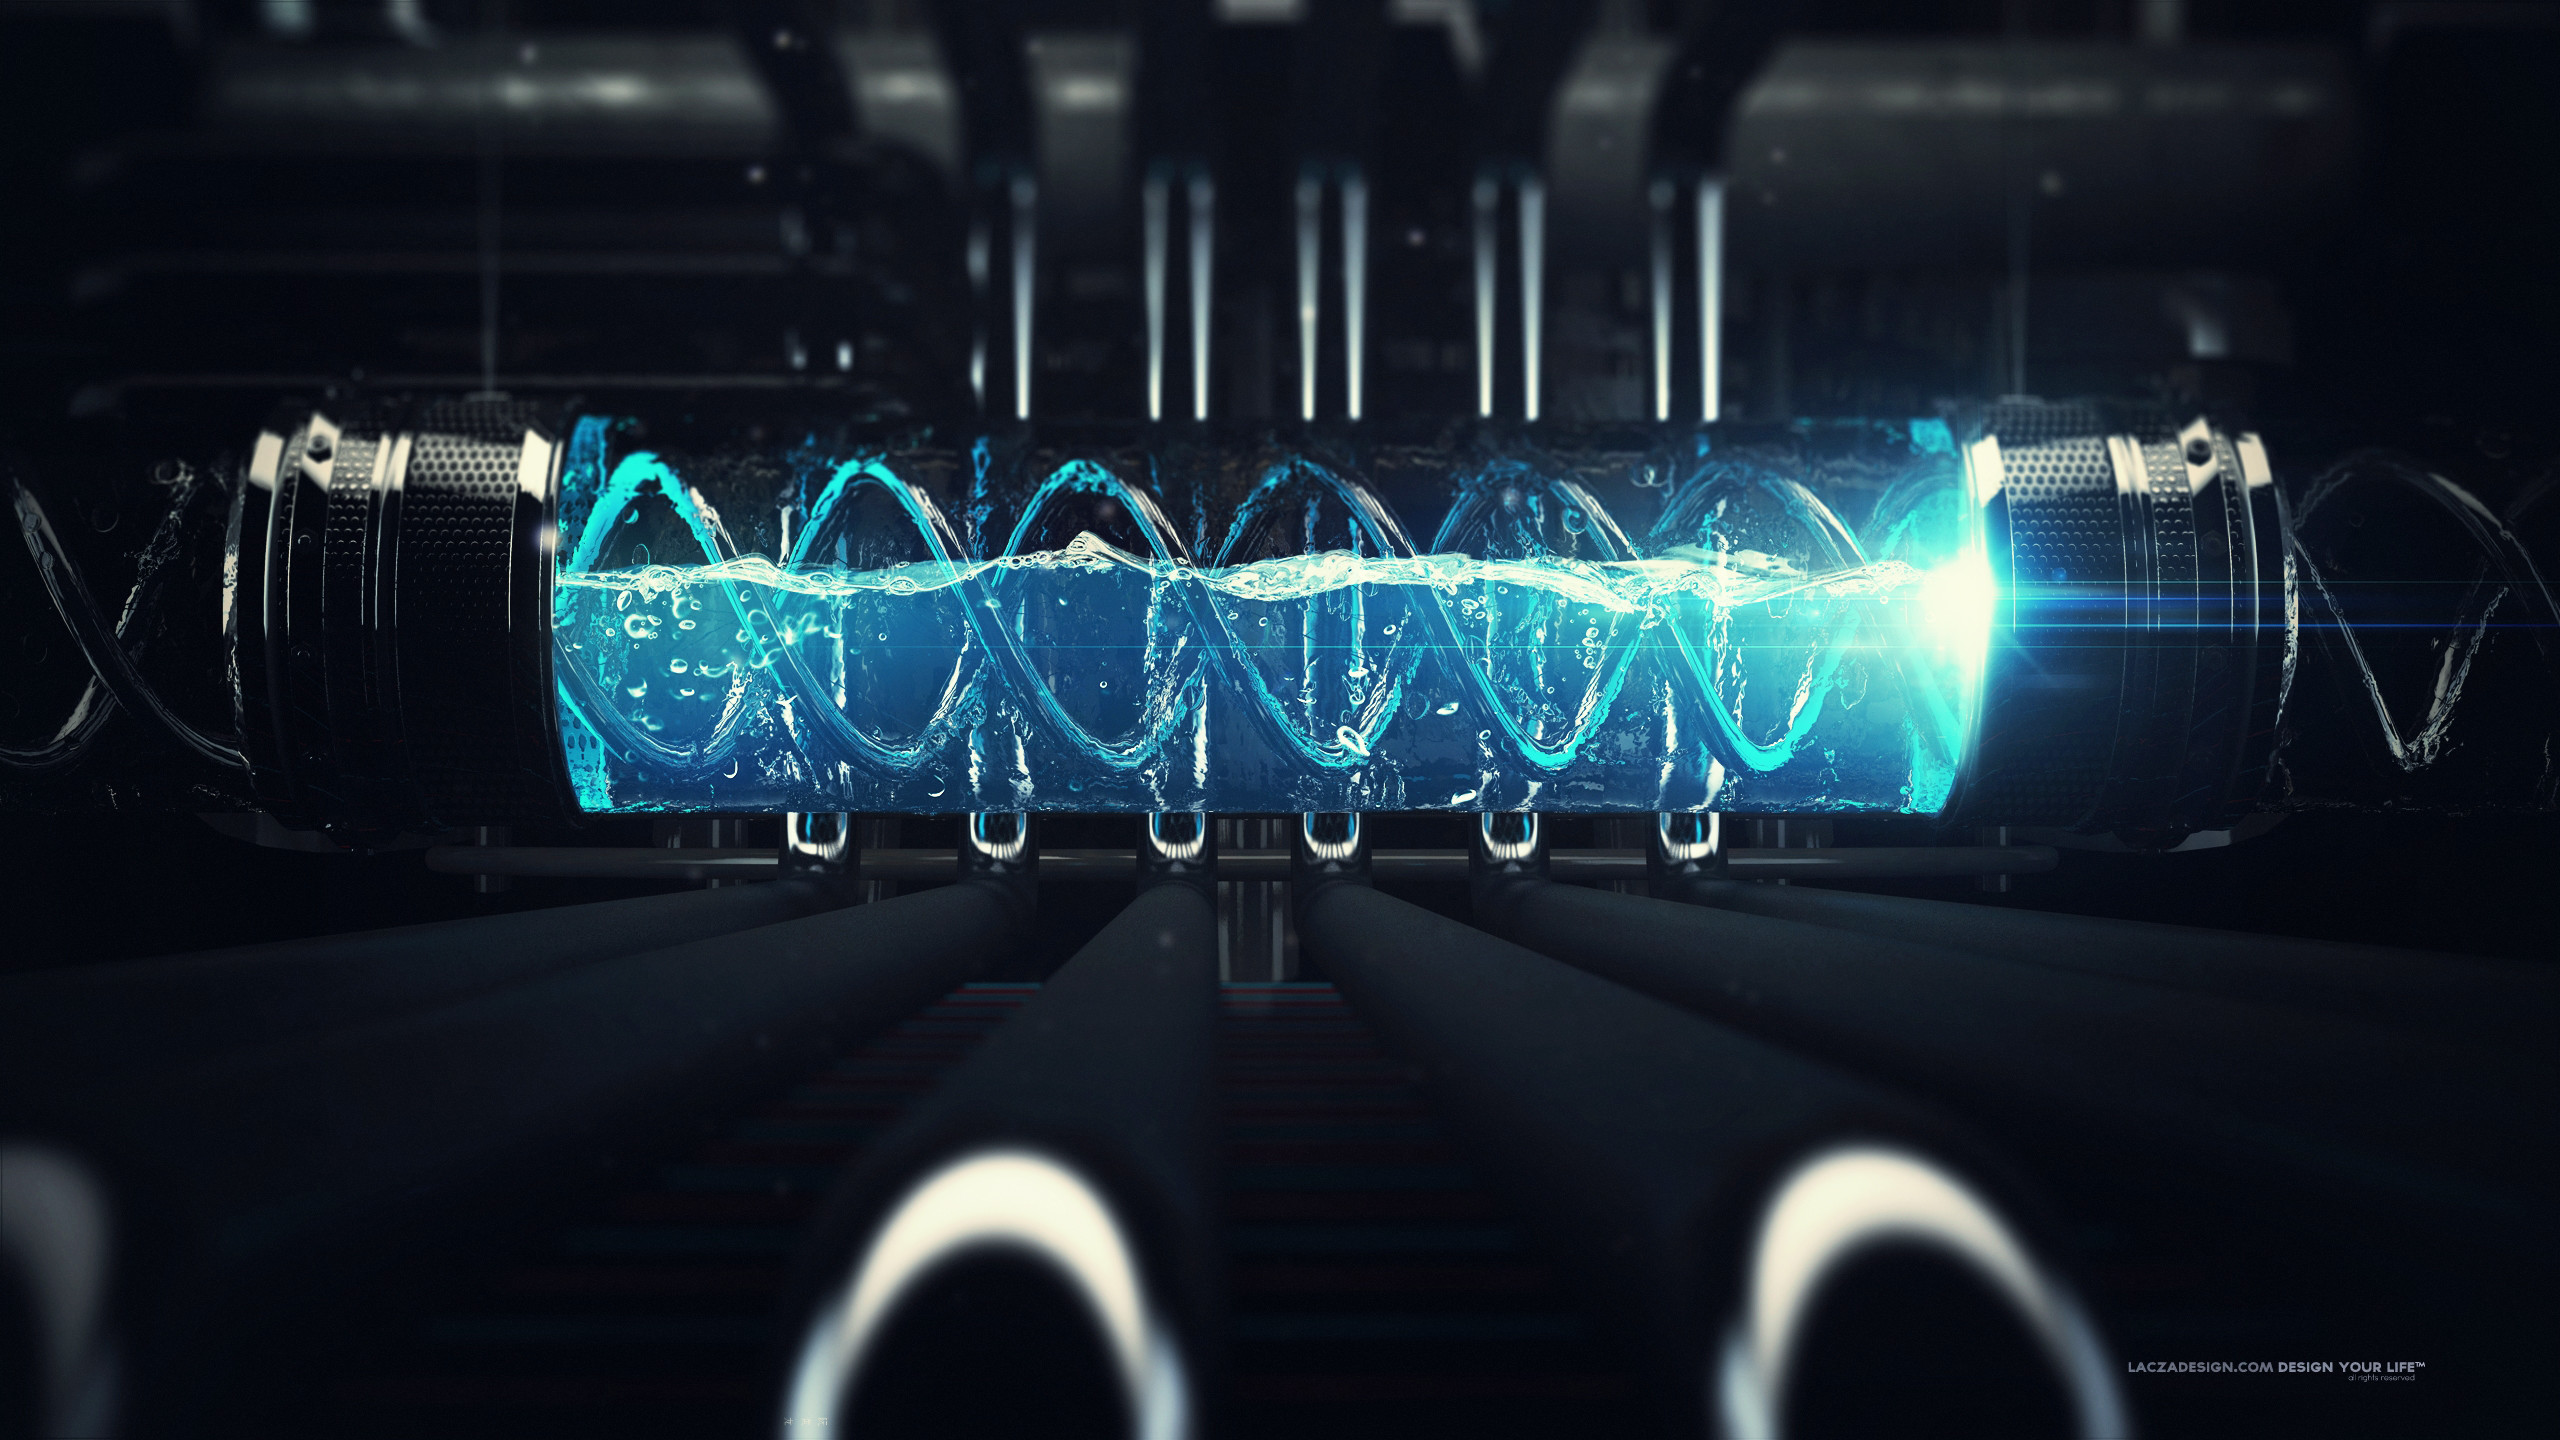 2560x1440 Chemical Factory wallpaper, blue liquid container tubes, double helix  spiral, lights, technology